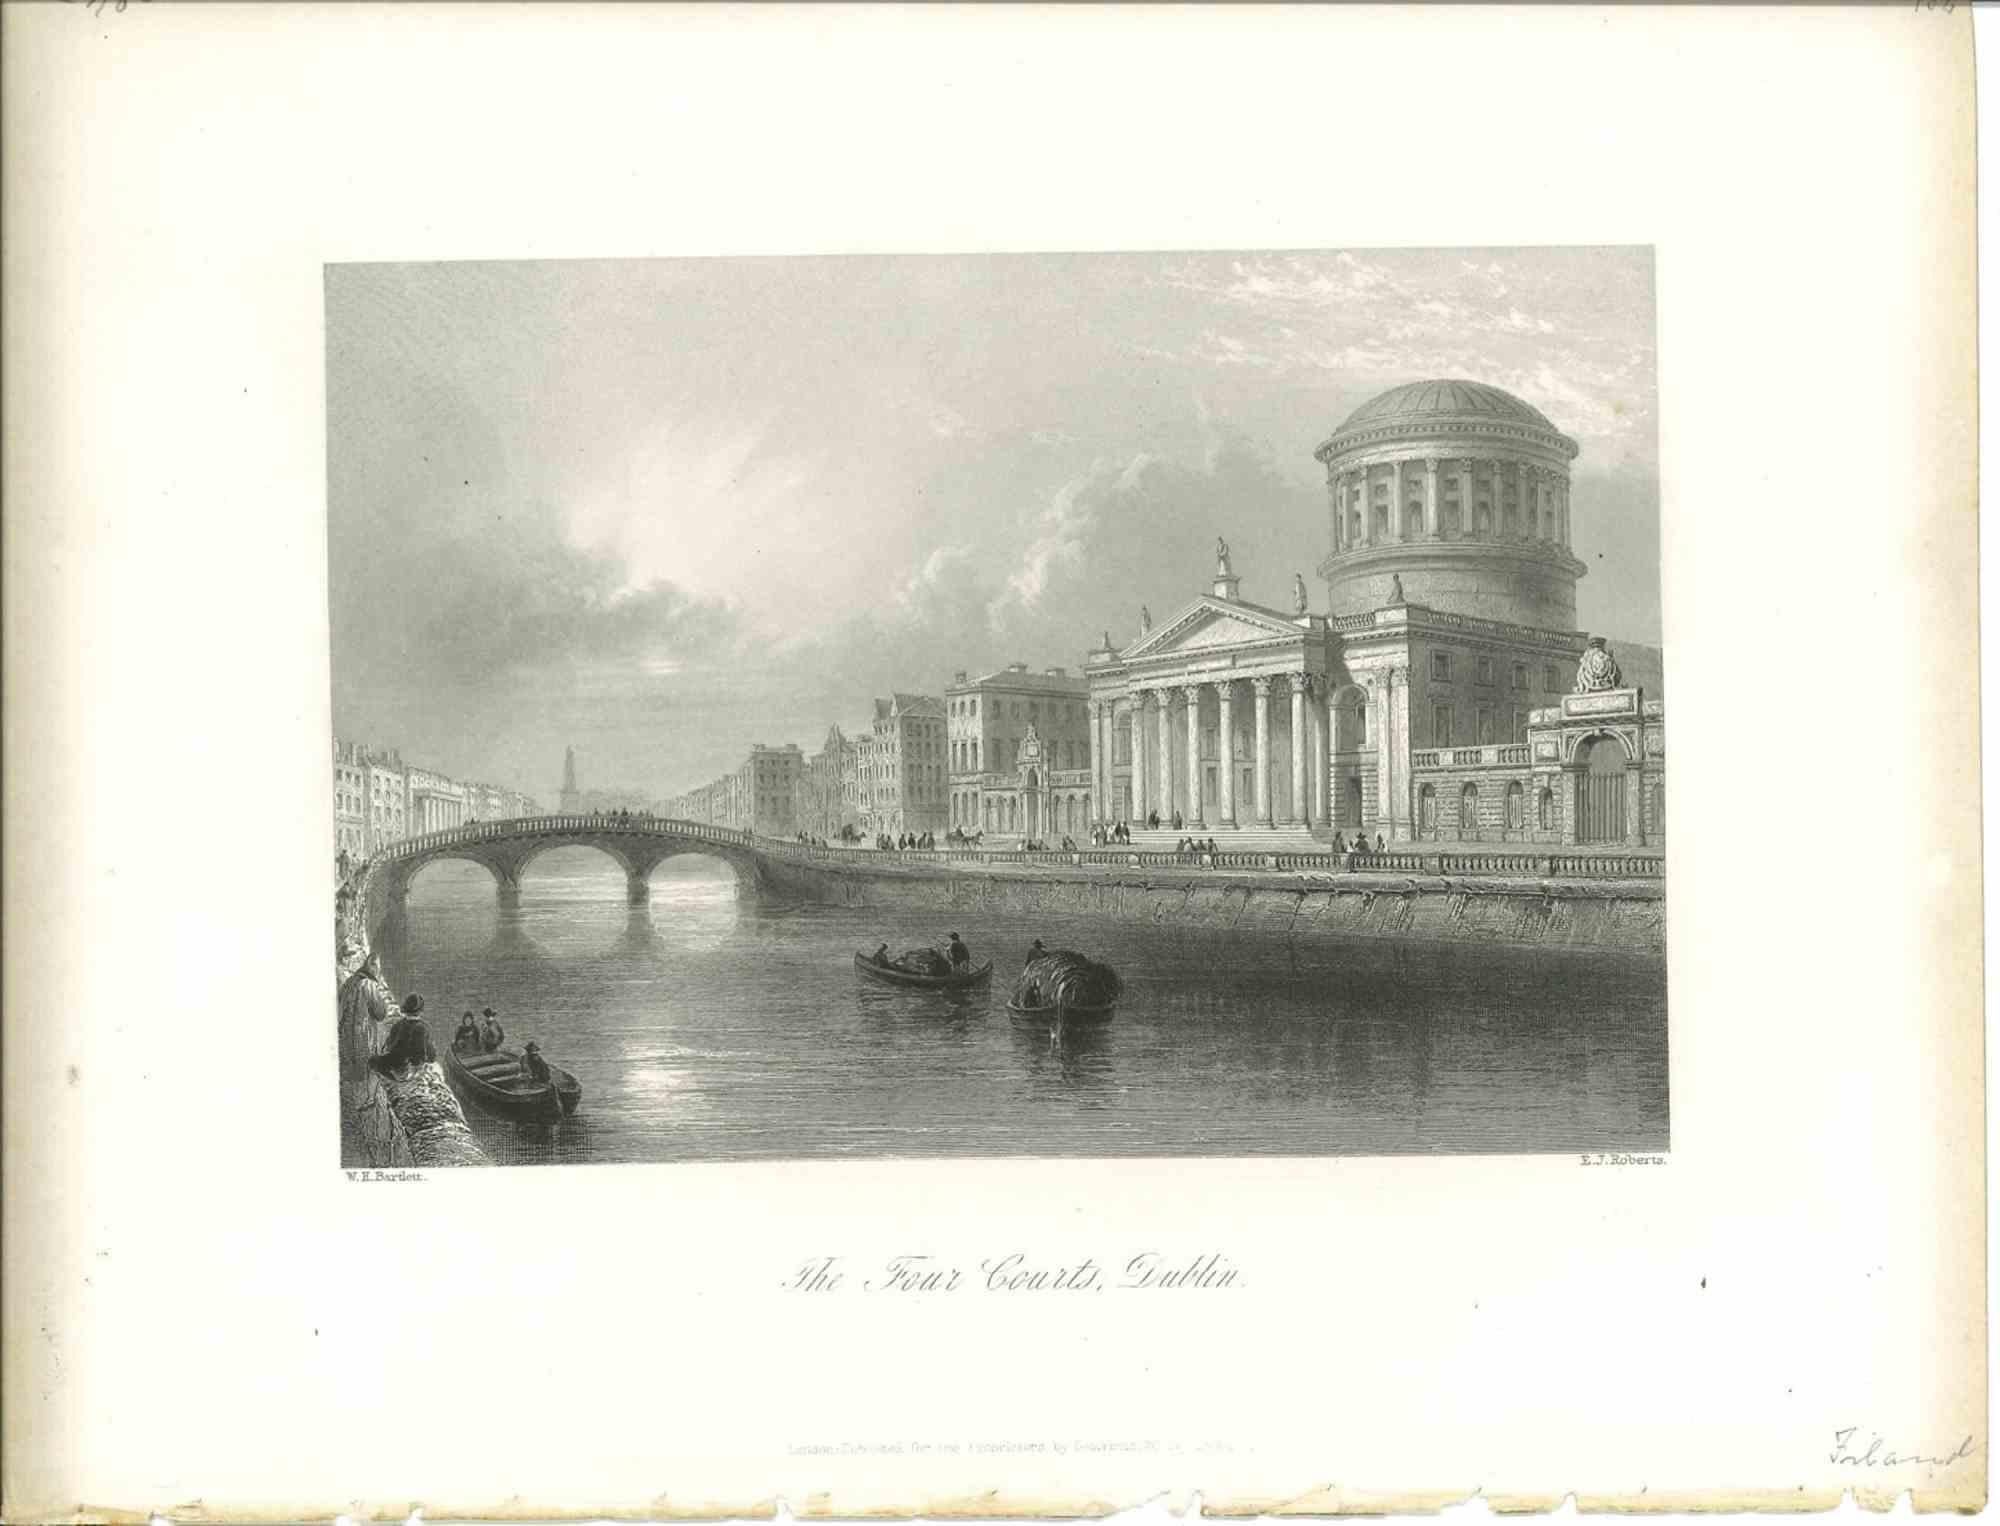 Unknown Figurative Print - The Four Courts - Original Lithograph - Mid-19th Century